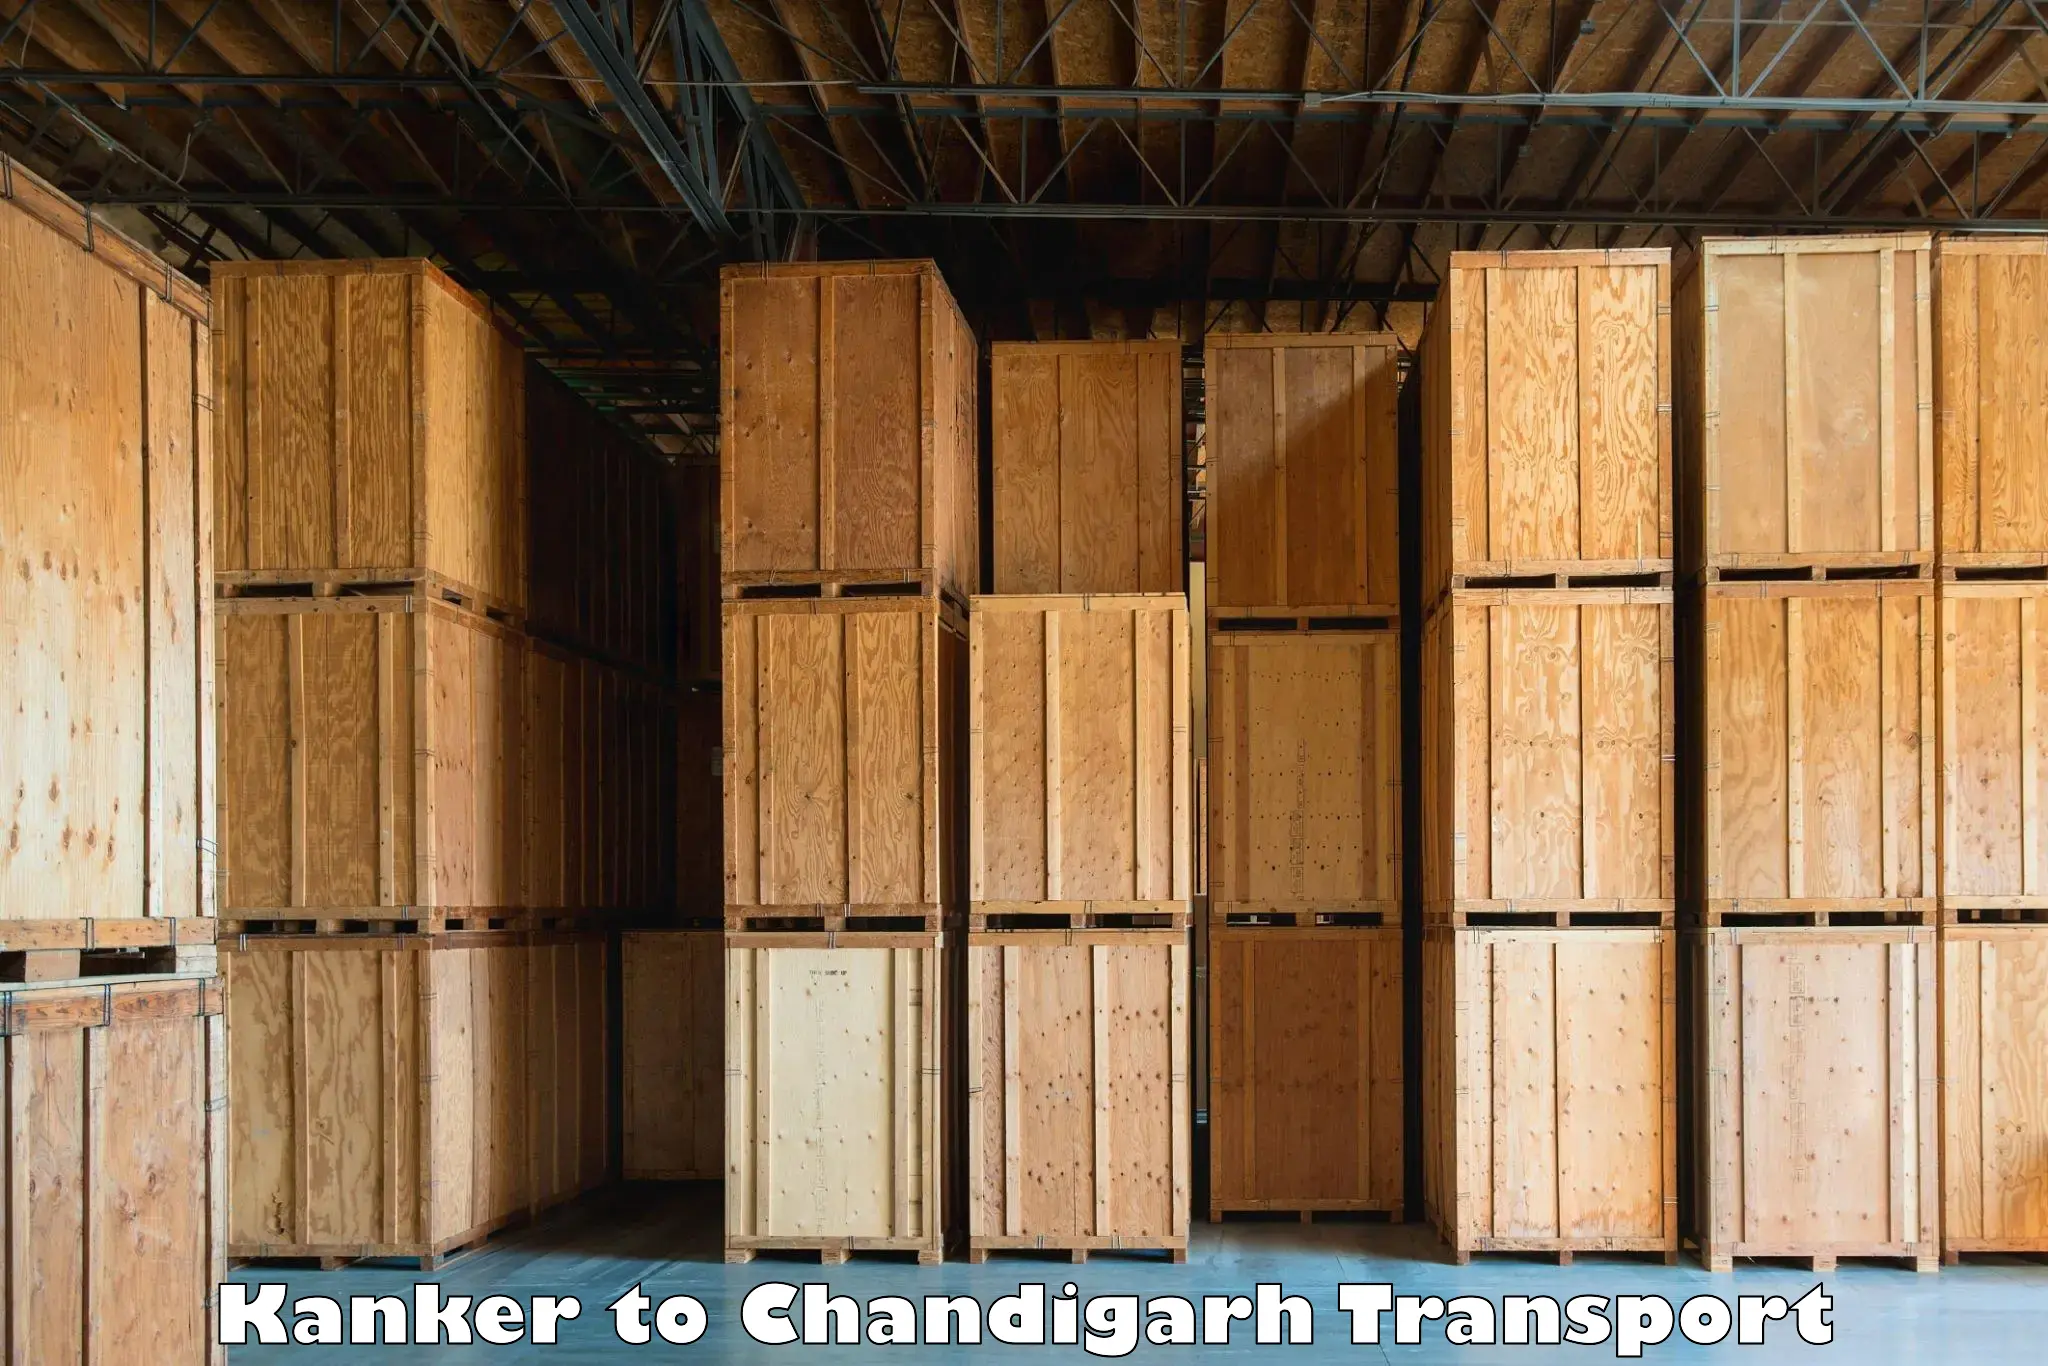 Container transport service Kanker to Chandigarh